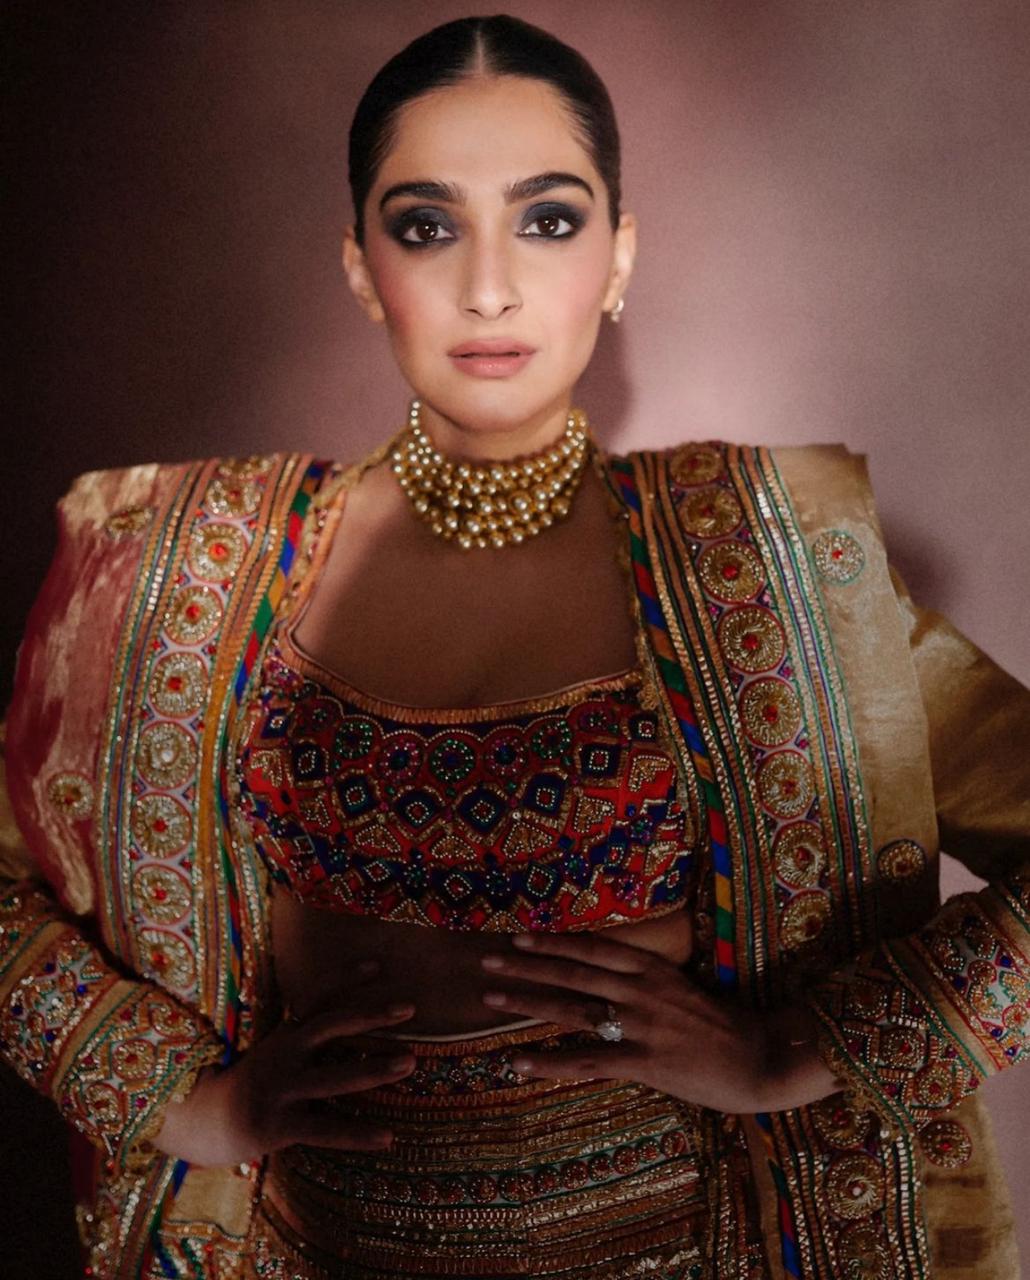 Rheson by Sonam Kapoor and Rhea KapoorSonam Kapoor and her sister Rhea Kapoor launched the Indian clothing company 